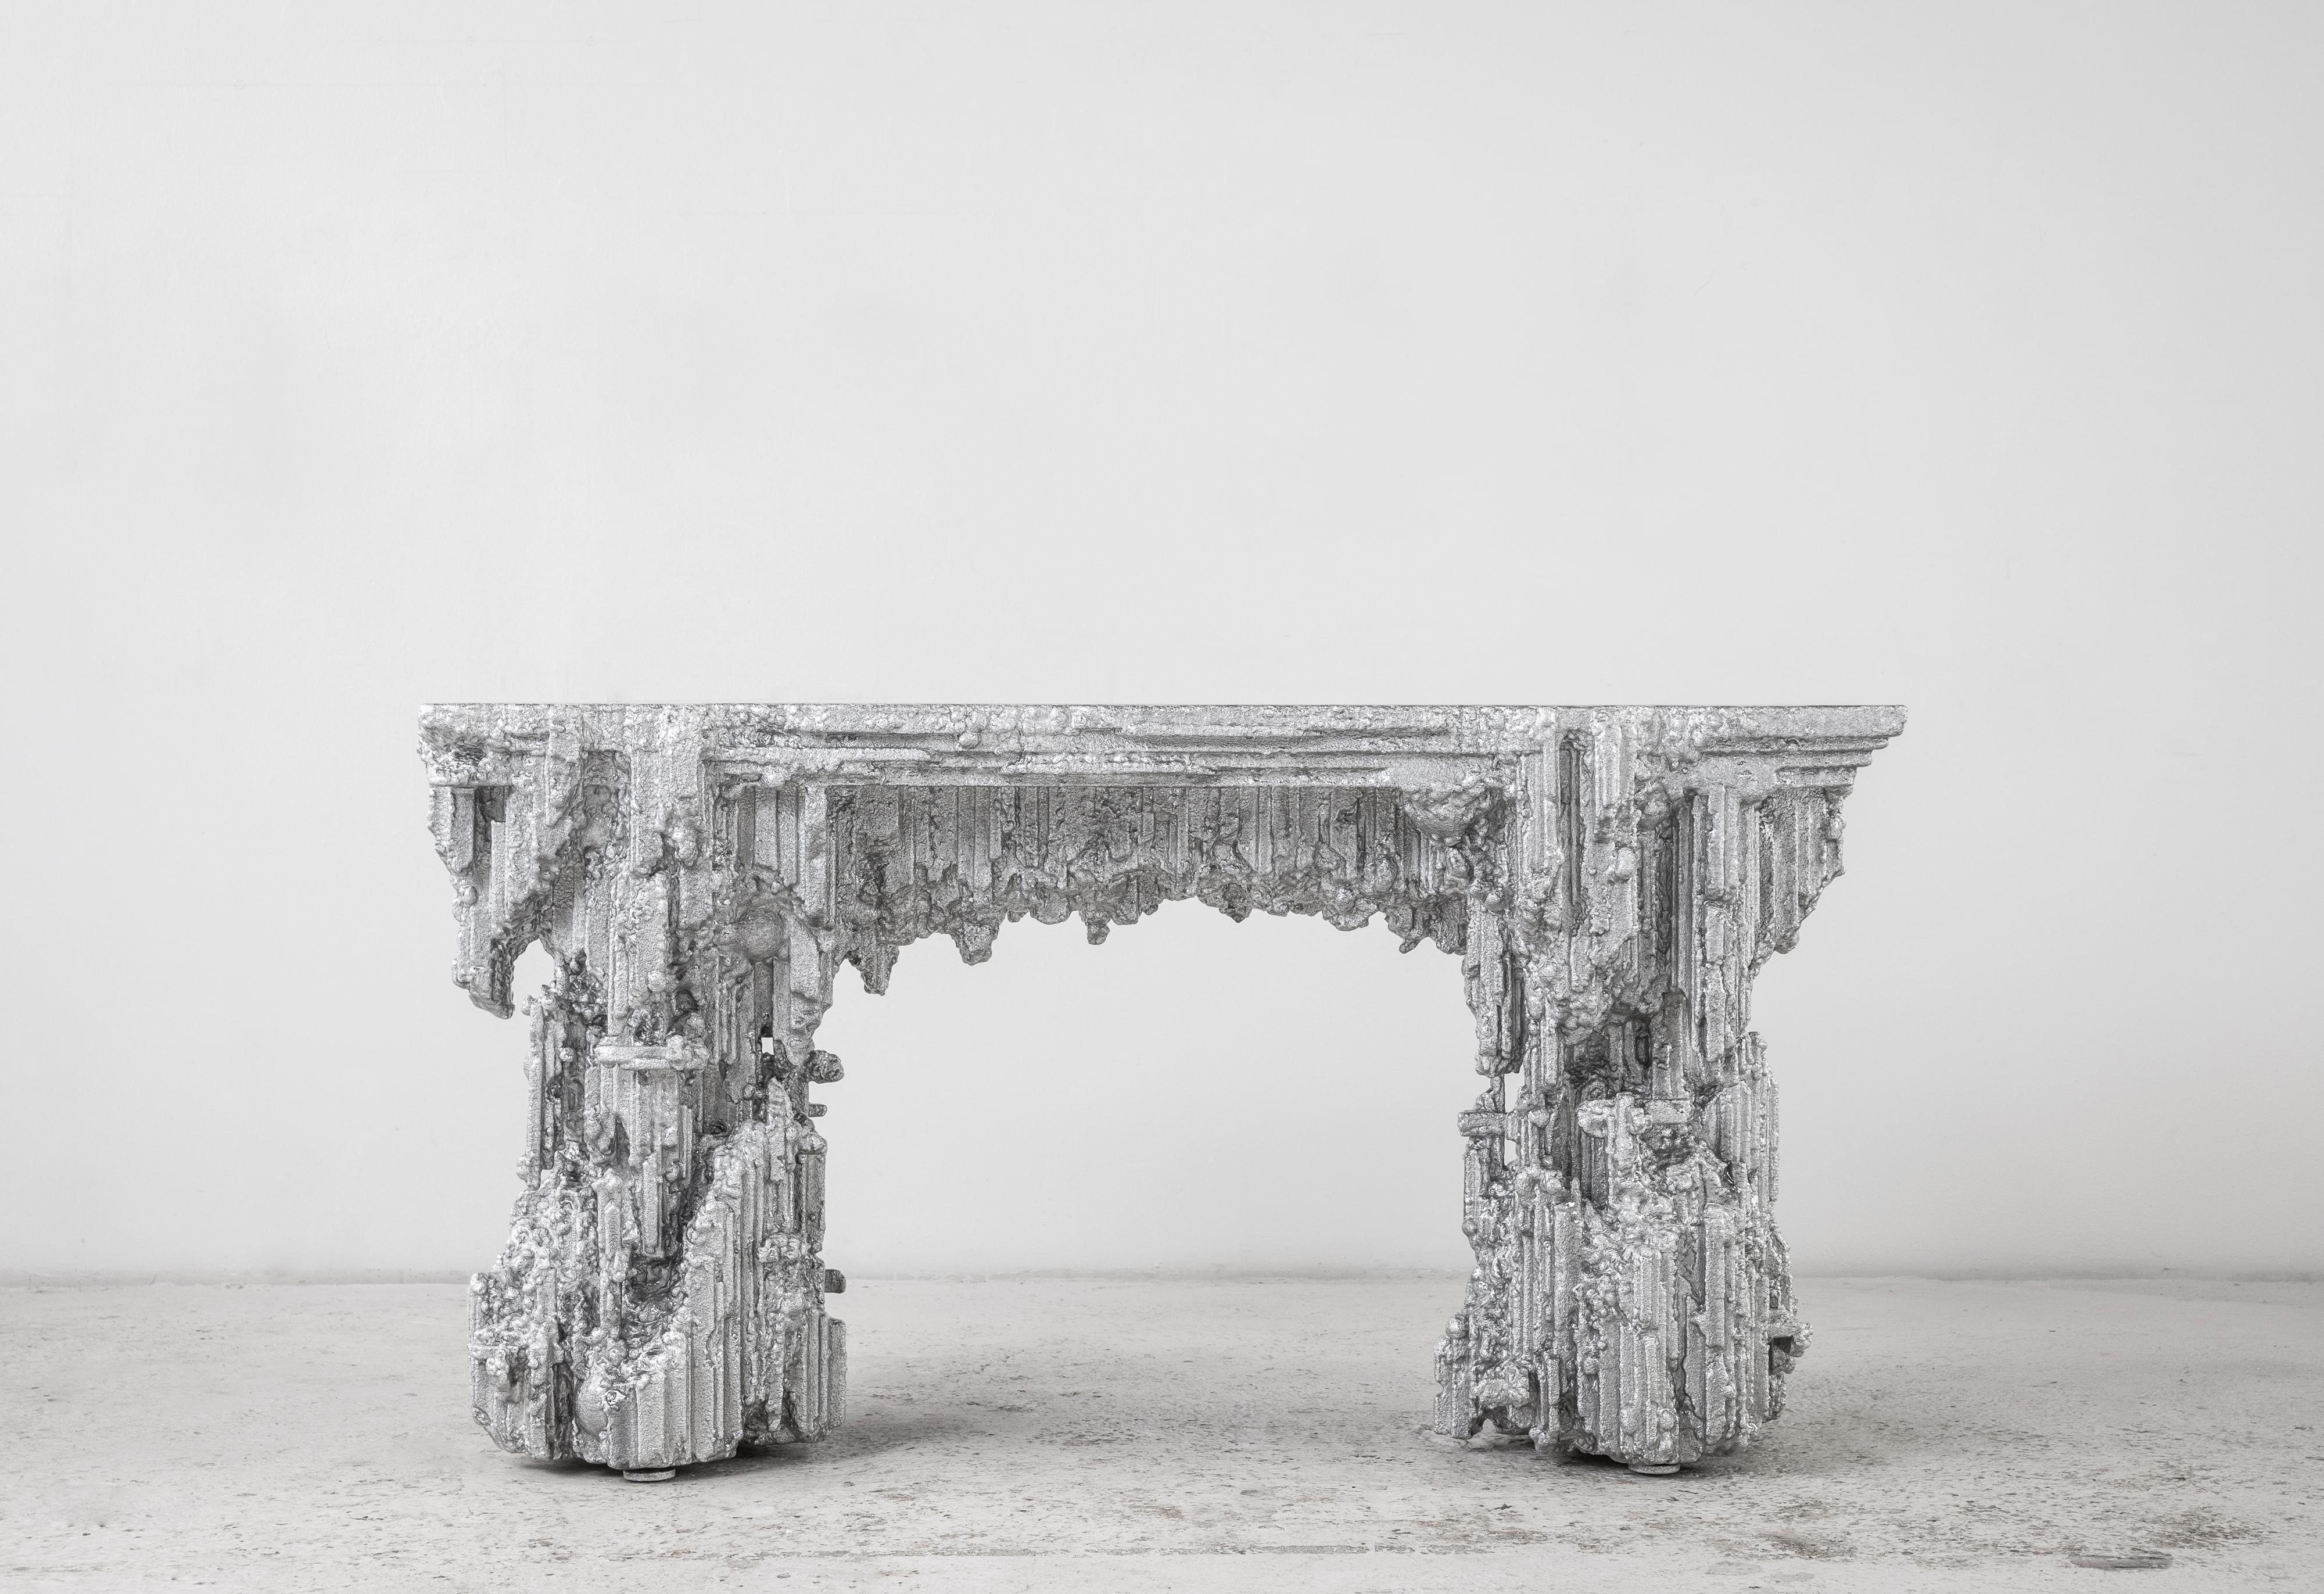 Chris Schanck [American, b. 1975]
Grotto Console (Silver), 2018
Steel, wood, polystyrene, resin, aluminum foil
31 x 60 x 18 inches
79 x 152.5 x 46 cm

Designer Chris Schanck’s work embraces the tension between dilapidation and opulence, asking